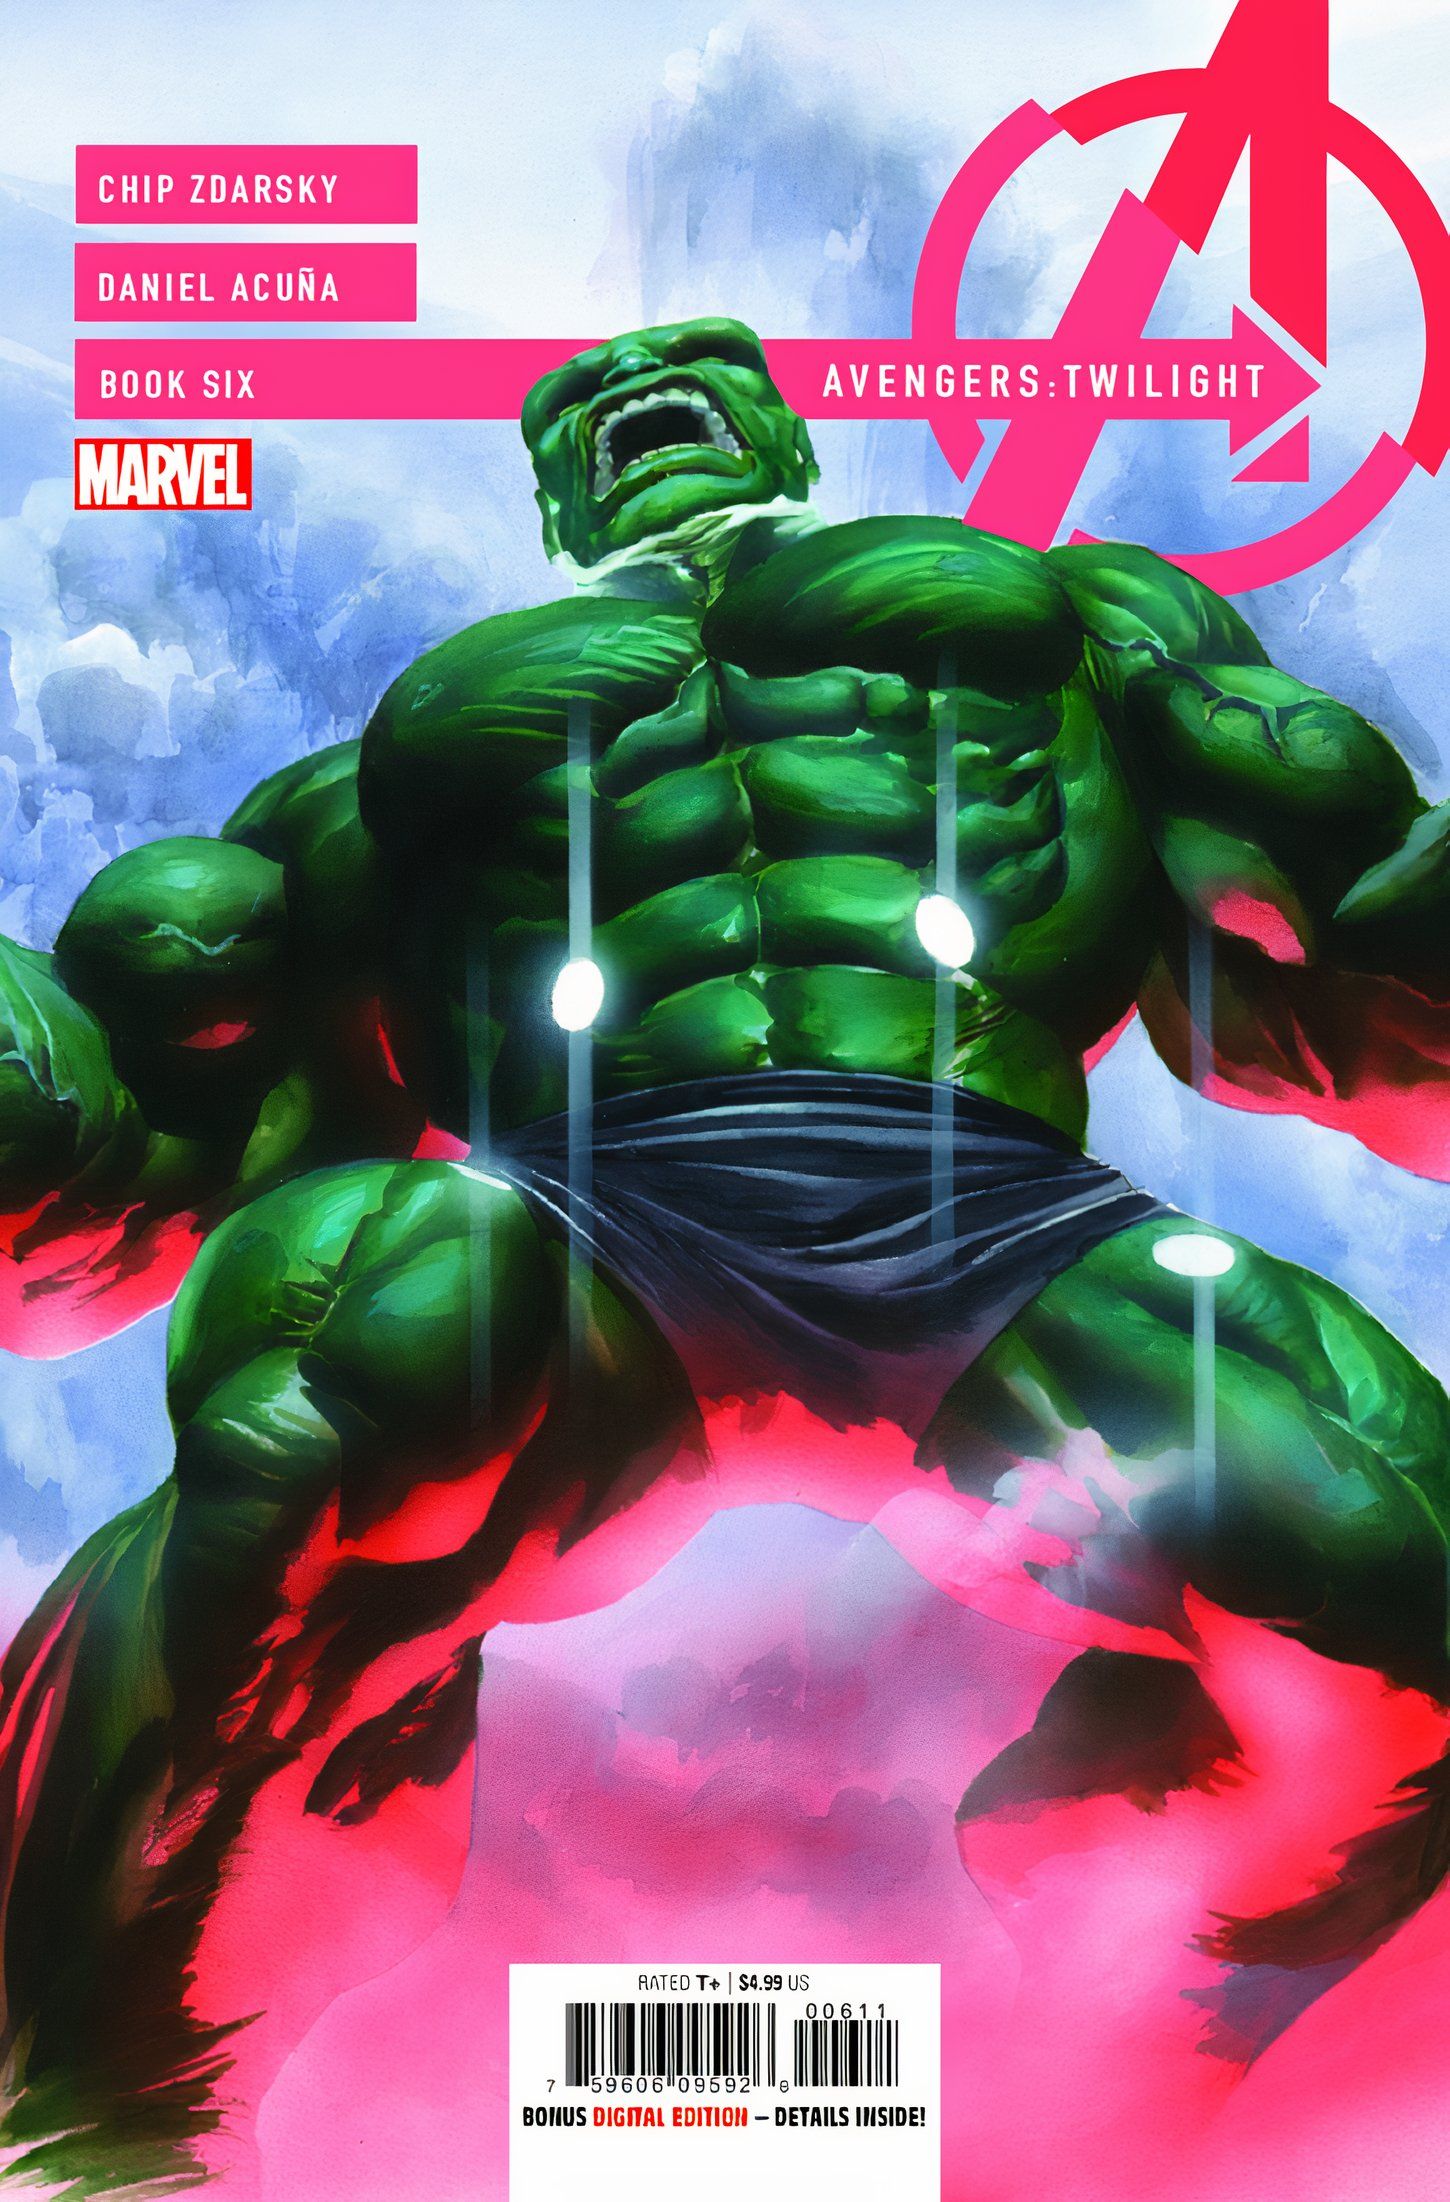 Angry Hulk against a red and blue background on Avengers Twilight #6 Cover. 